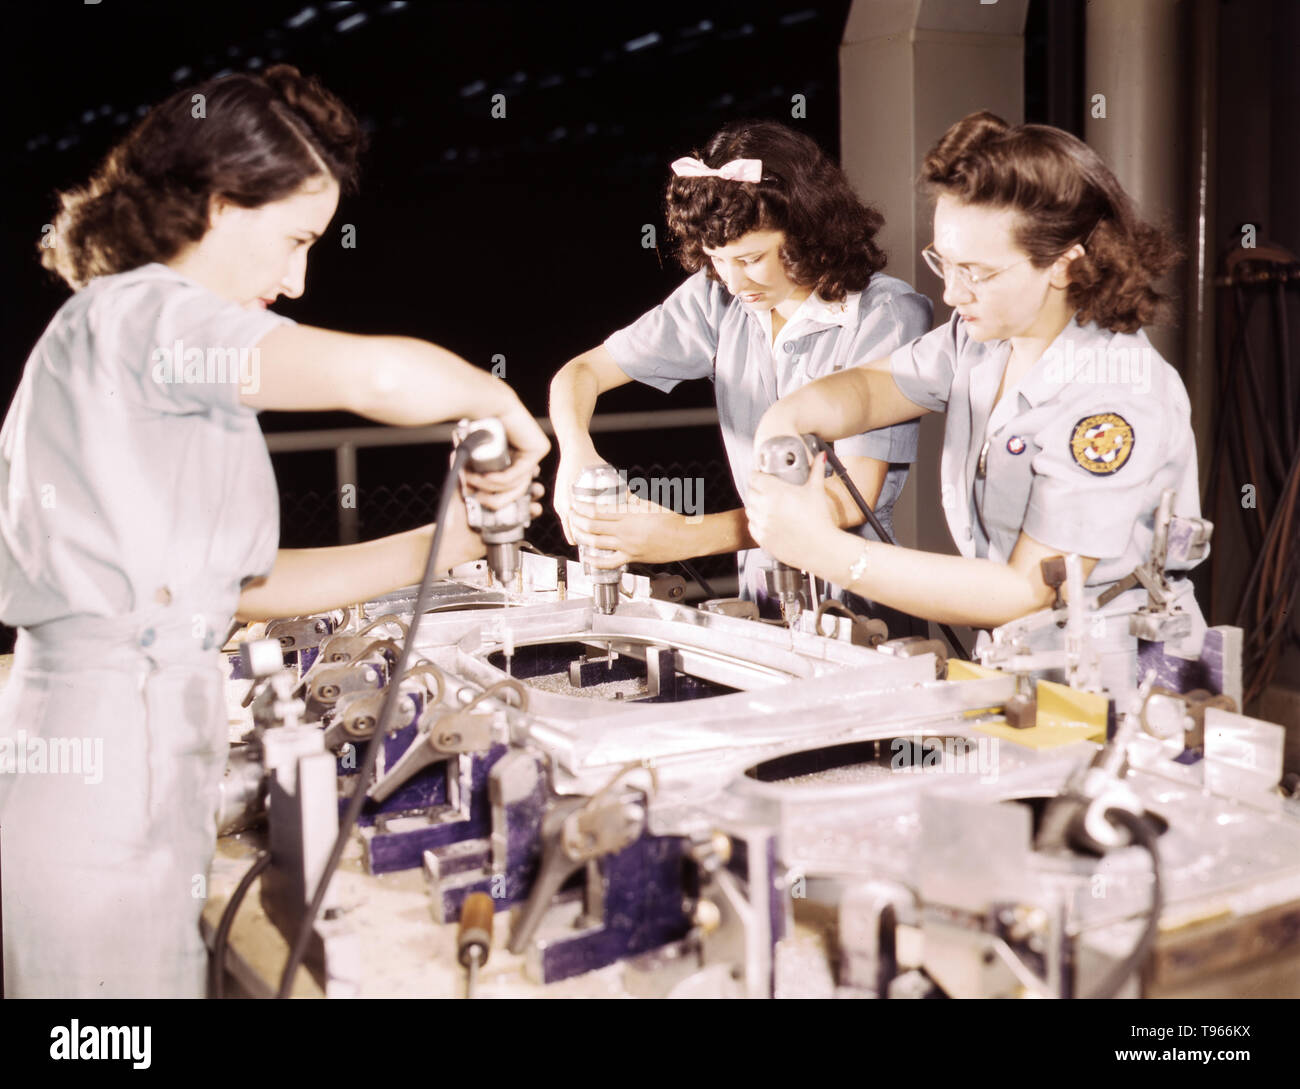 Drilling a wing bulkhead for a transport plane at the Consolidated Aircraft Corporation plant, Fort Worth, Texas. Although the image of 'Rosie the Riveter' reflected the industrial work of welders and riveters, the majority of working women filled non-factory positions in every sector of the economy. What unified the experiences of these women was that they proved to themselves, and the country, that they could do a man's job and could do it well. Photographed by Howard R. Hollem, 1942. Stock Photo